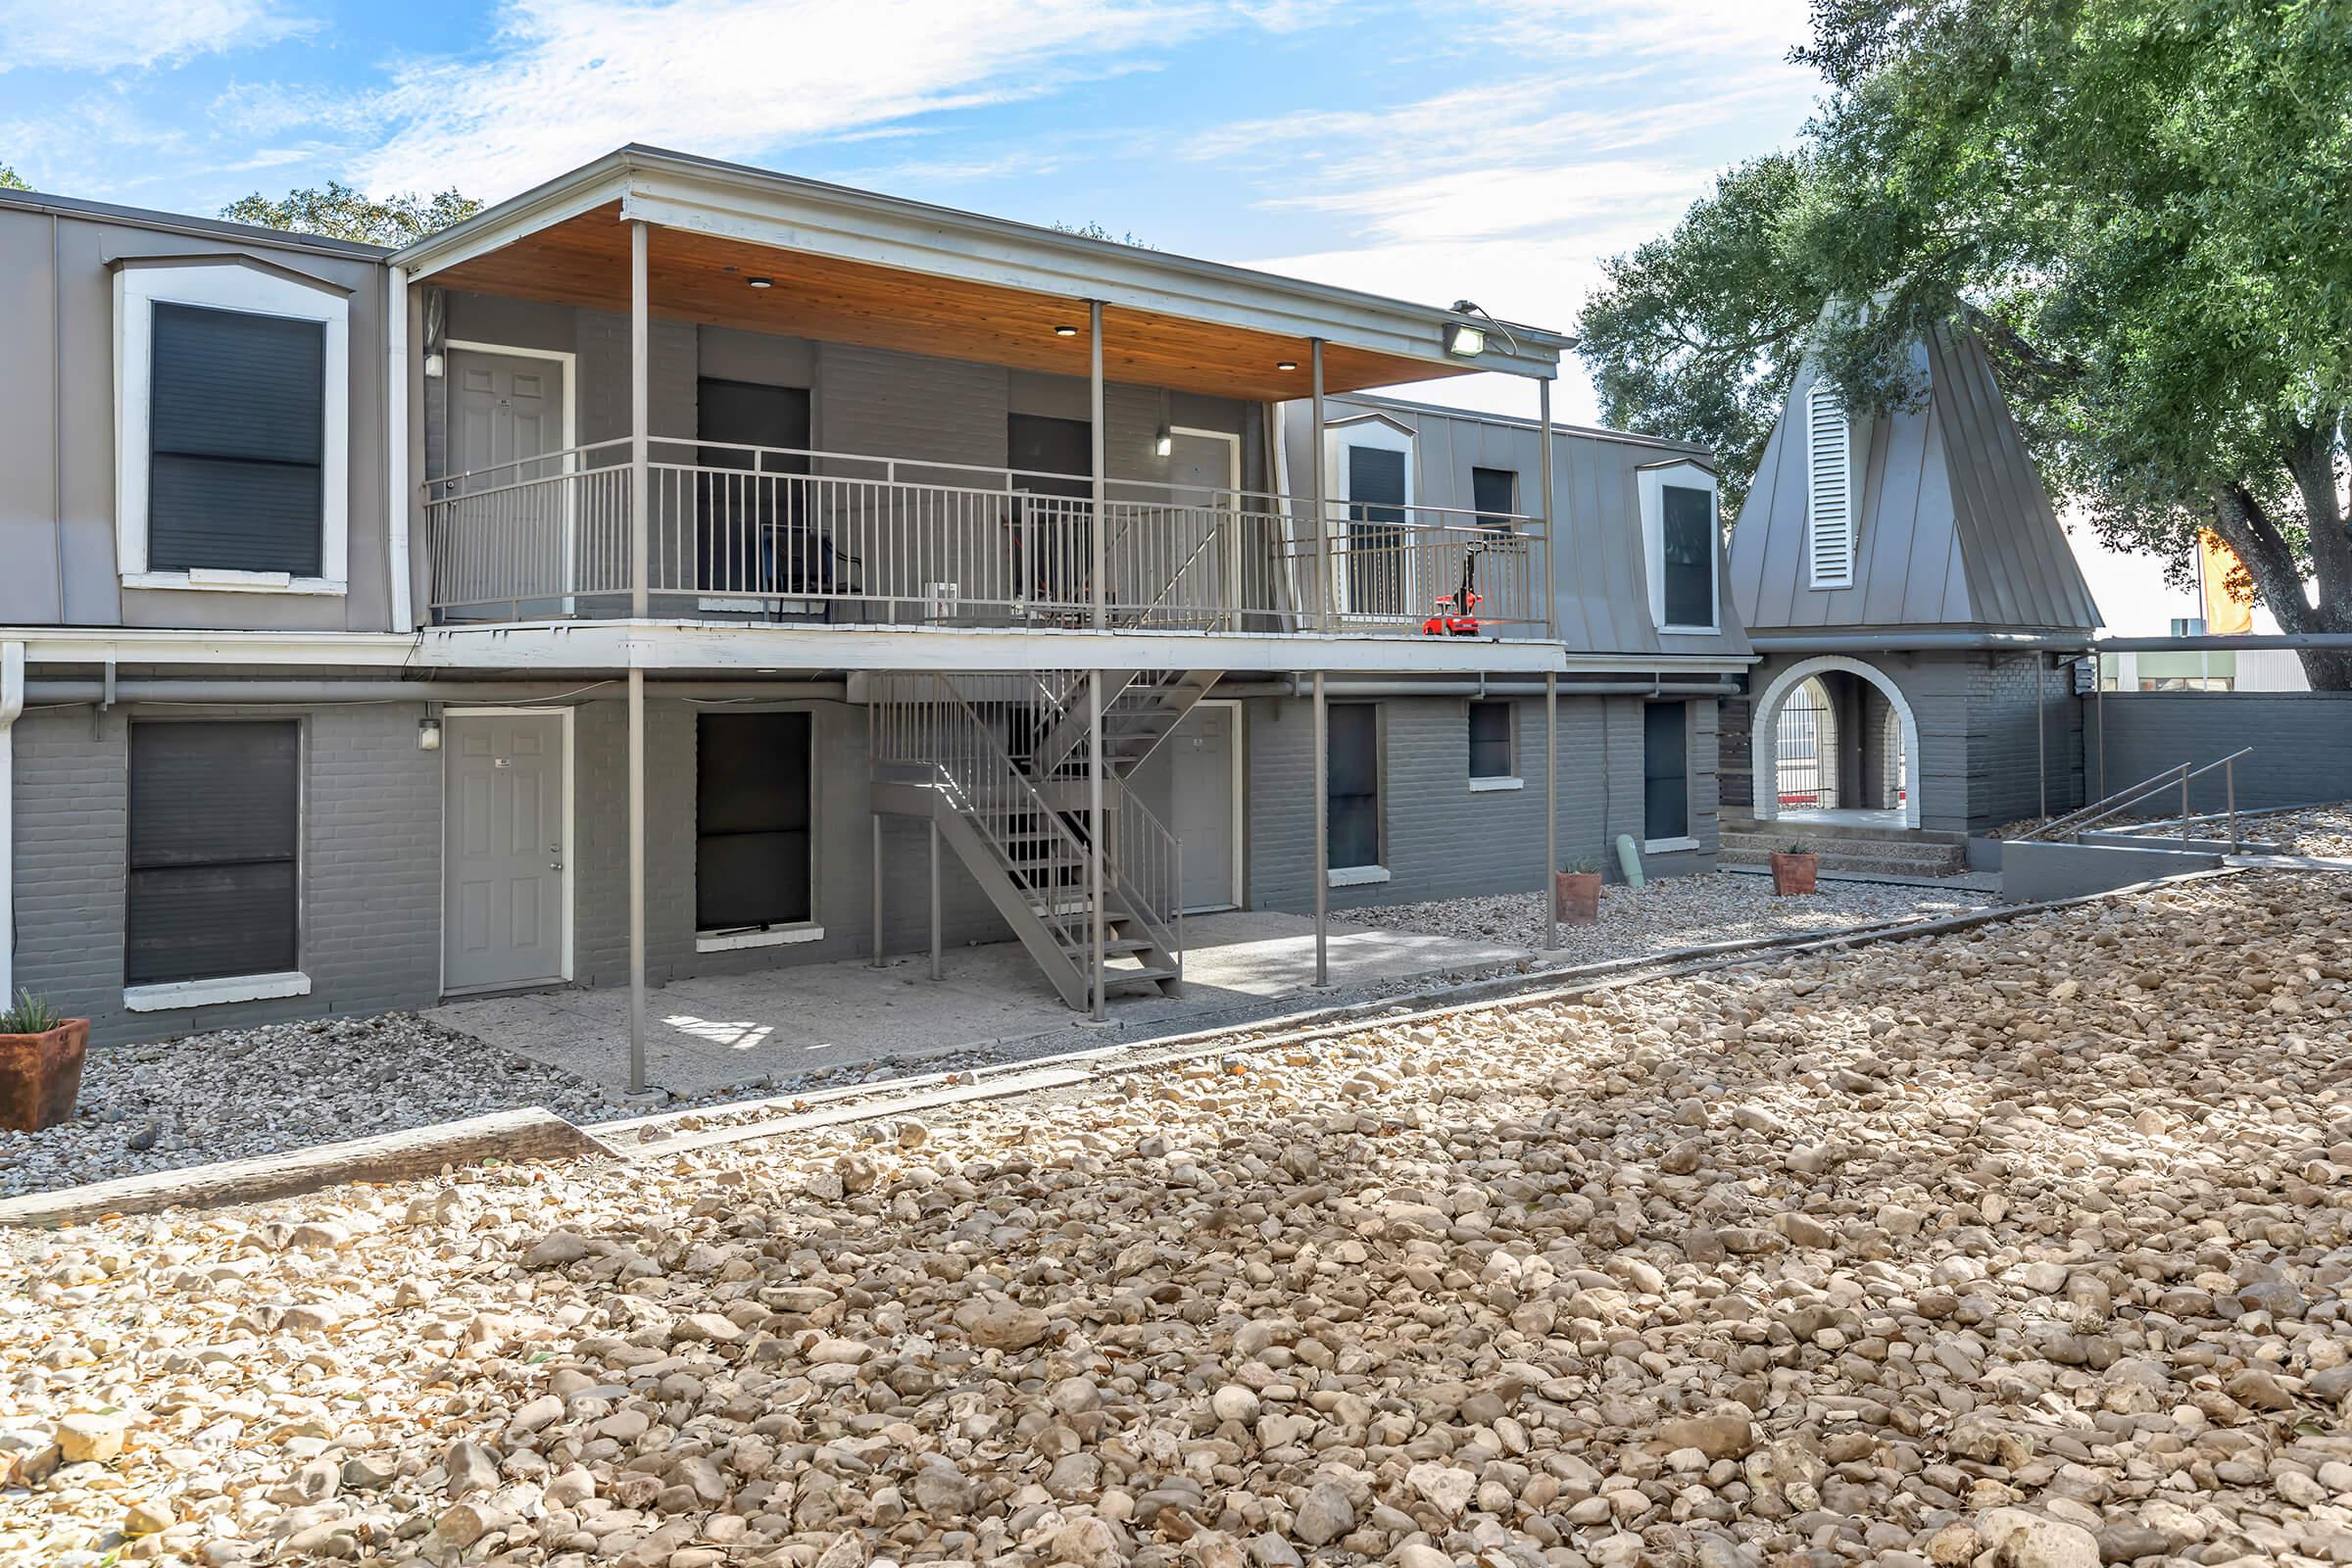 TWO AND THREE BEDROOM APARTMENTS FOR RENT IN SAN ANTONIO, TX